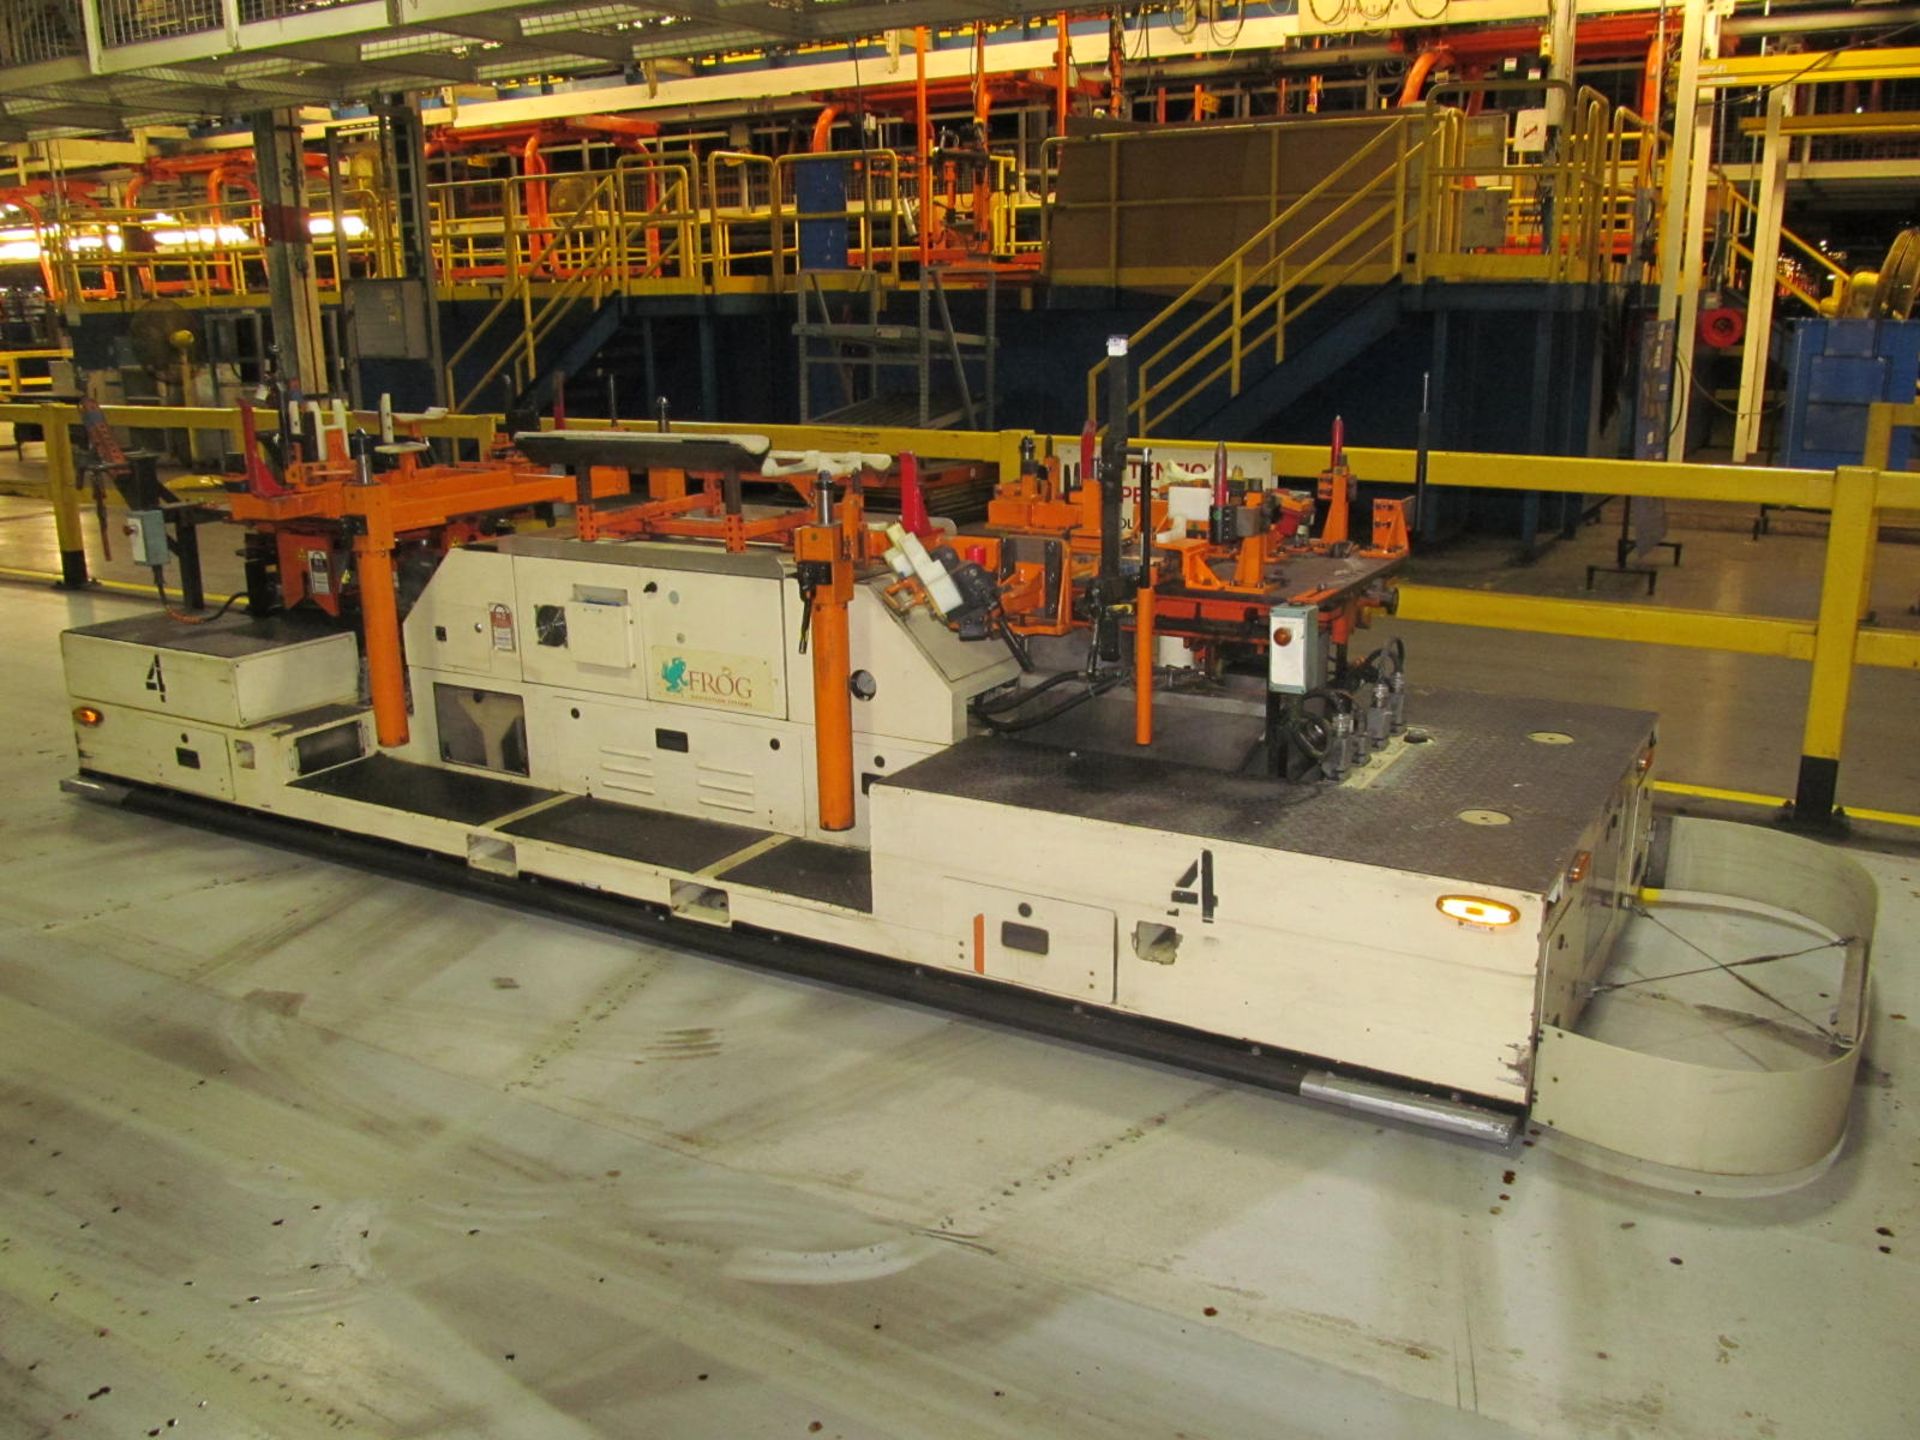 FROG GM COMMON AGV (AUTOMATED GUIDED VEHICLE), S/N 2002-004, 8000 LB. CAPACITY, 48 VOLT,